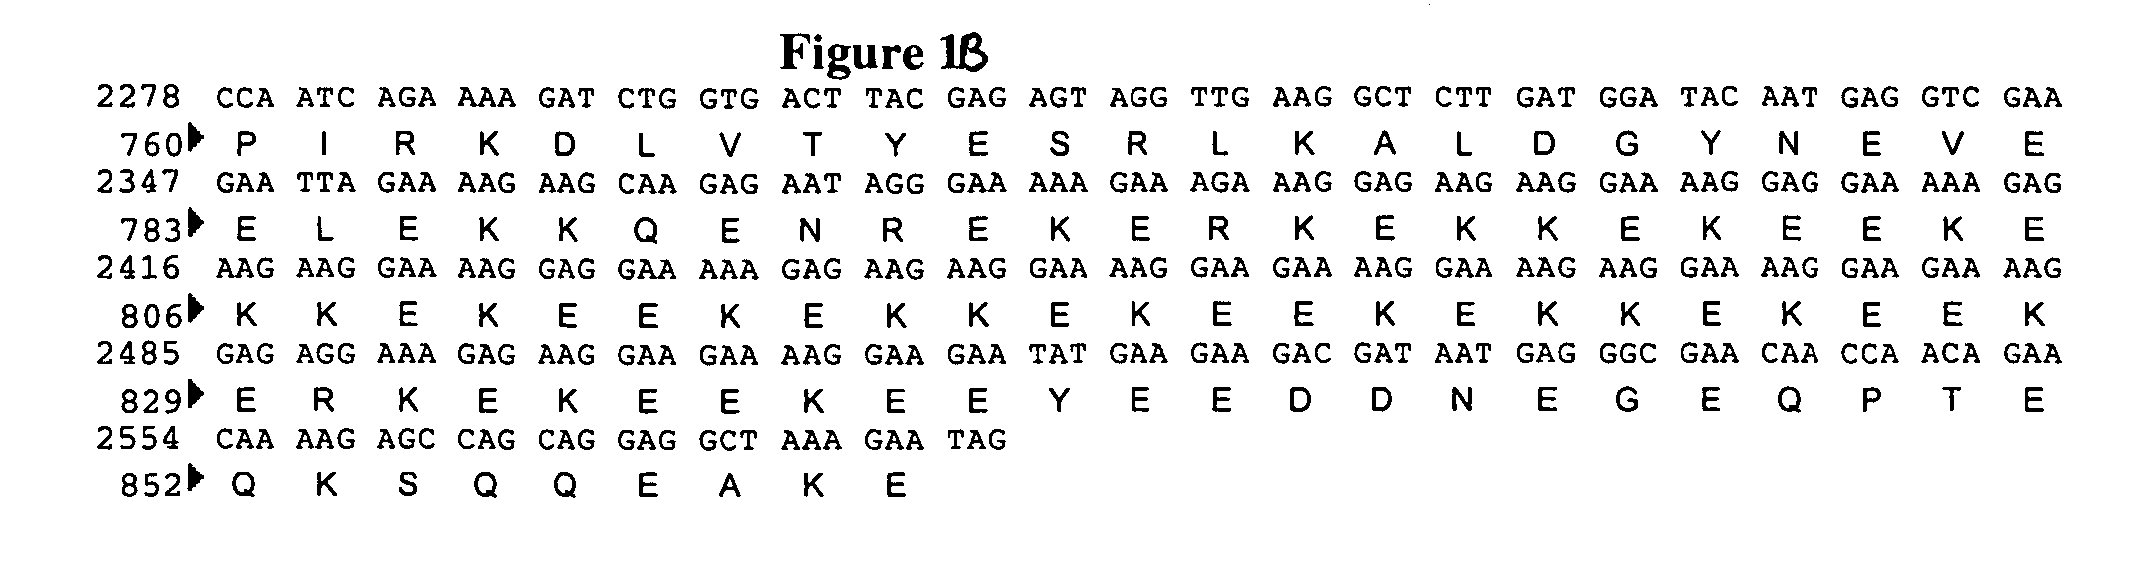 Methods for eliminating mannosylphosphorylation of glycans in the production of glycoproteins